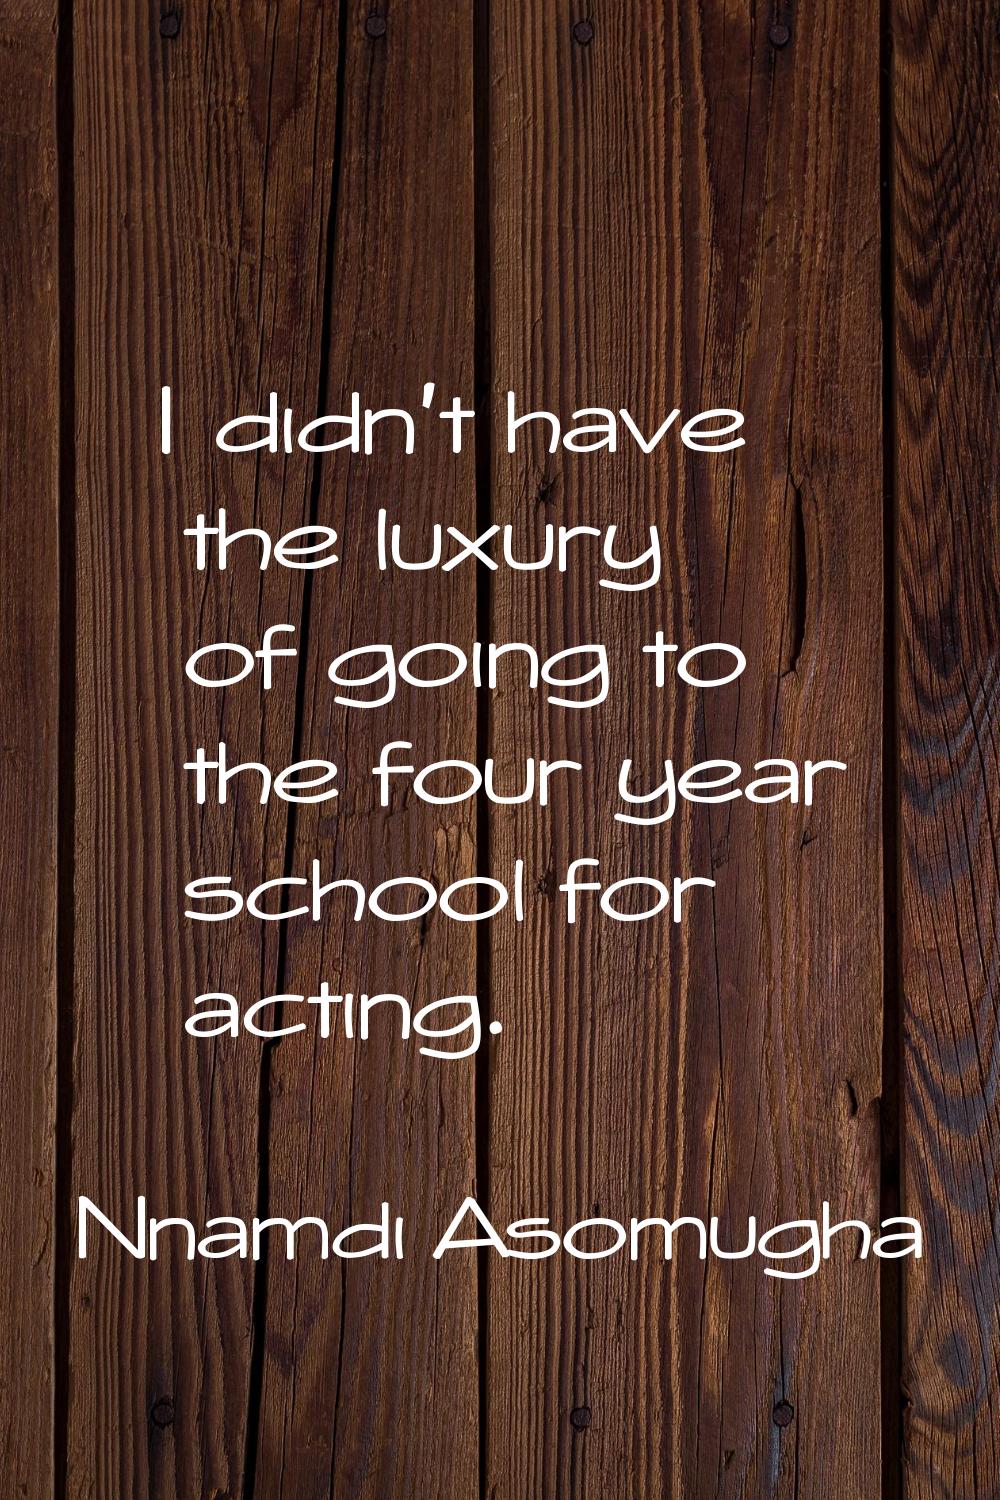 I didn't have the luxury of going to the four year school for acting.